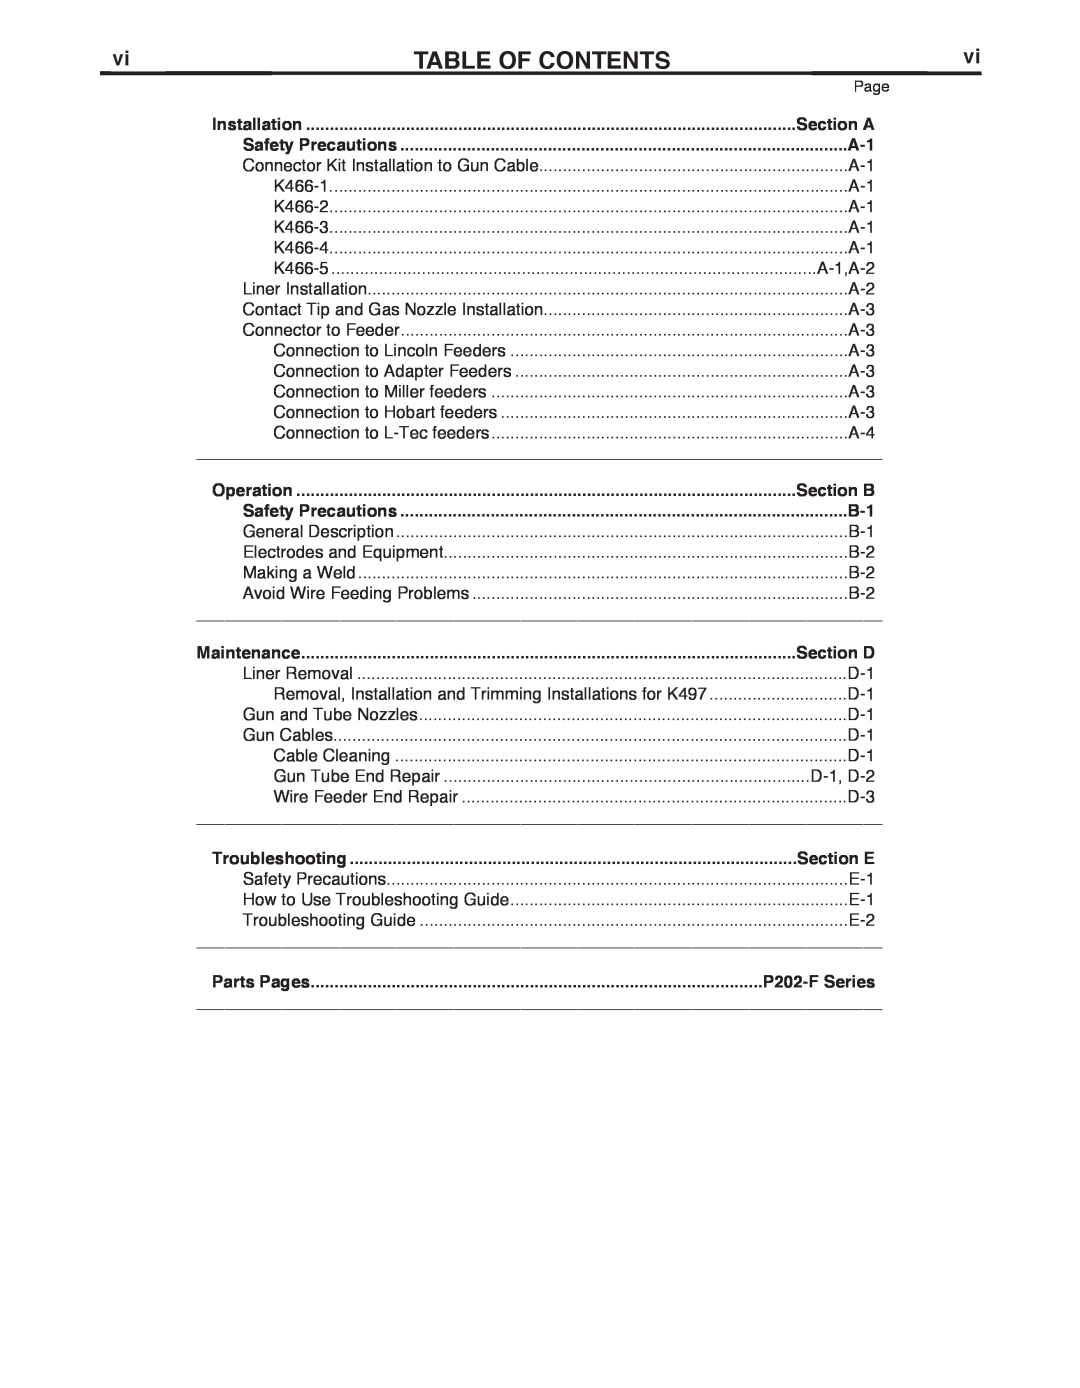 Lincoln Electric K2950, K497 manual TAbLE OF CONTENTS, Section A, Section b, Section D, Section E, P202-F Series 